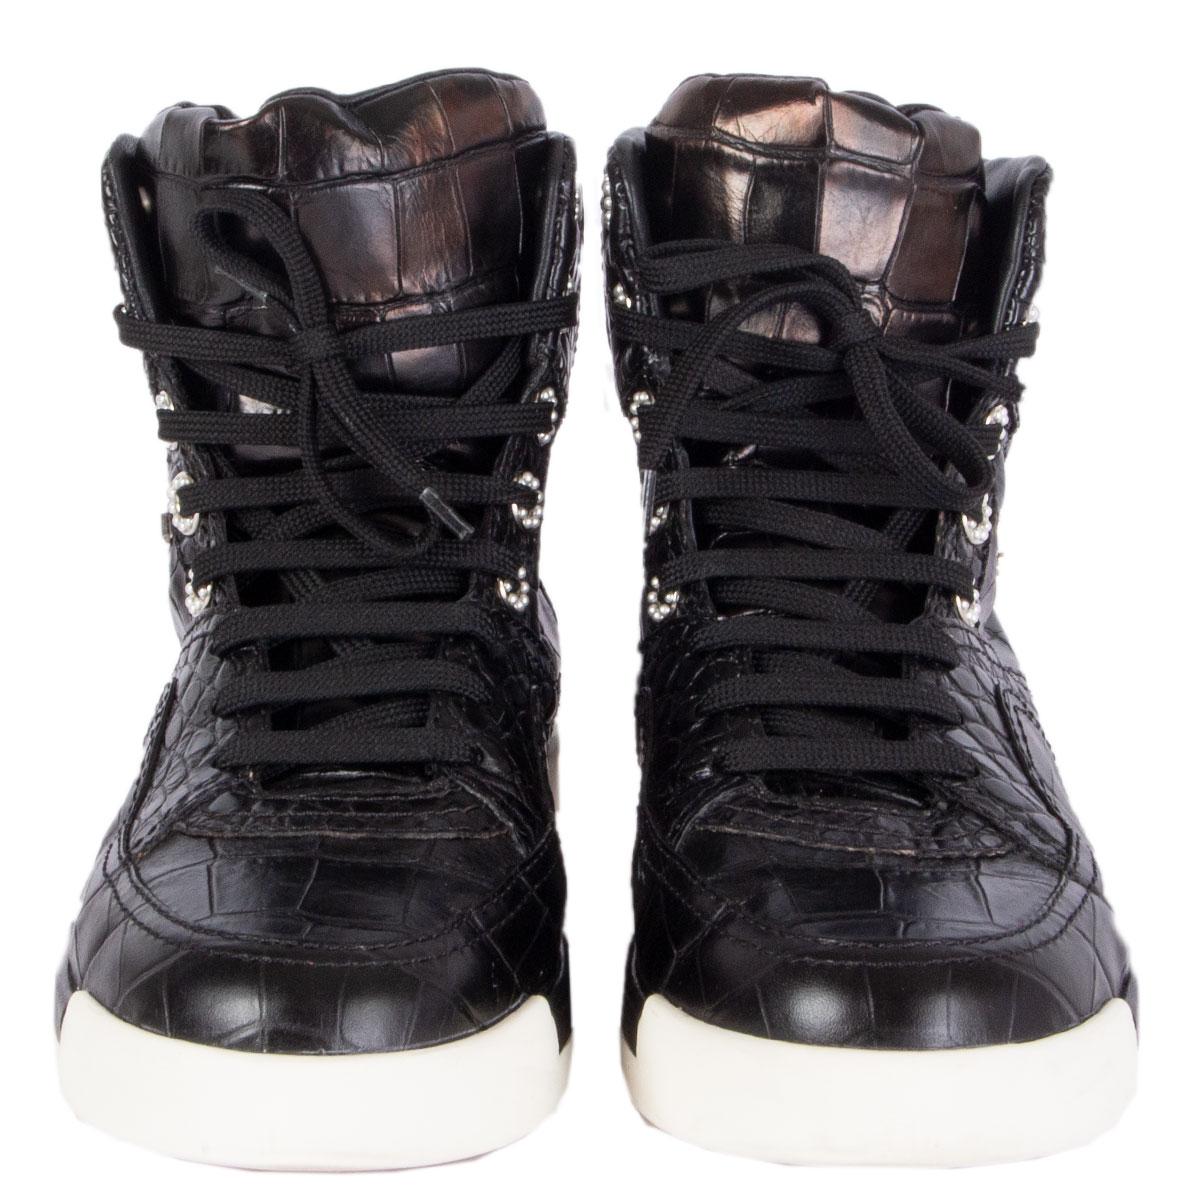 100% authentic Chanel lace-up high-top sneakers in black crocodile embossed leather. Silver accent lettering on the side. Pearl embellished eyelets. Padded shoe tongue and white rubber sole. Have been worn and are in excellent condition. 

Imprinted